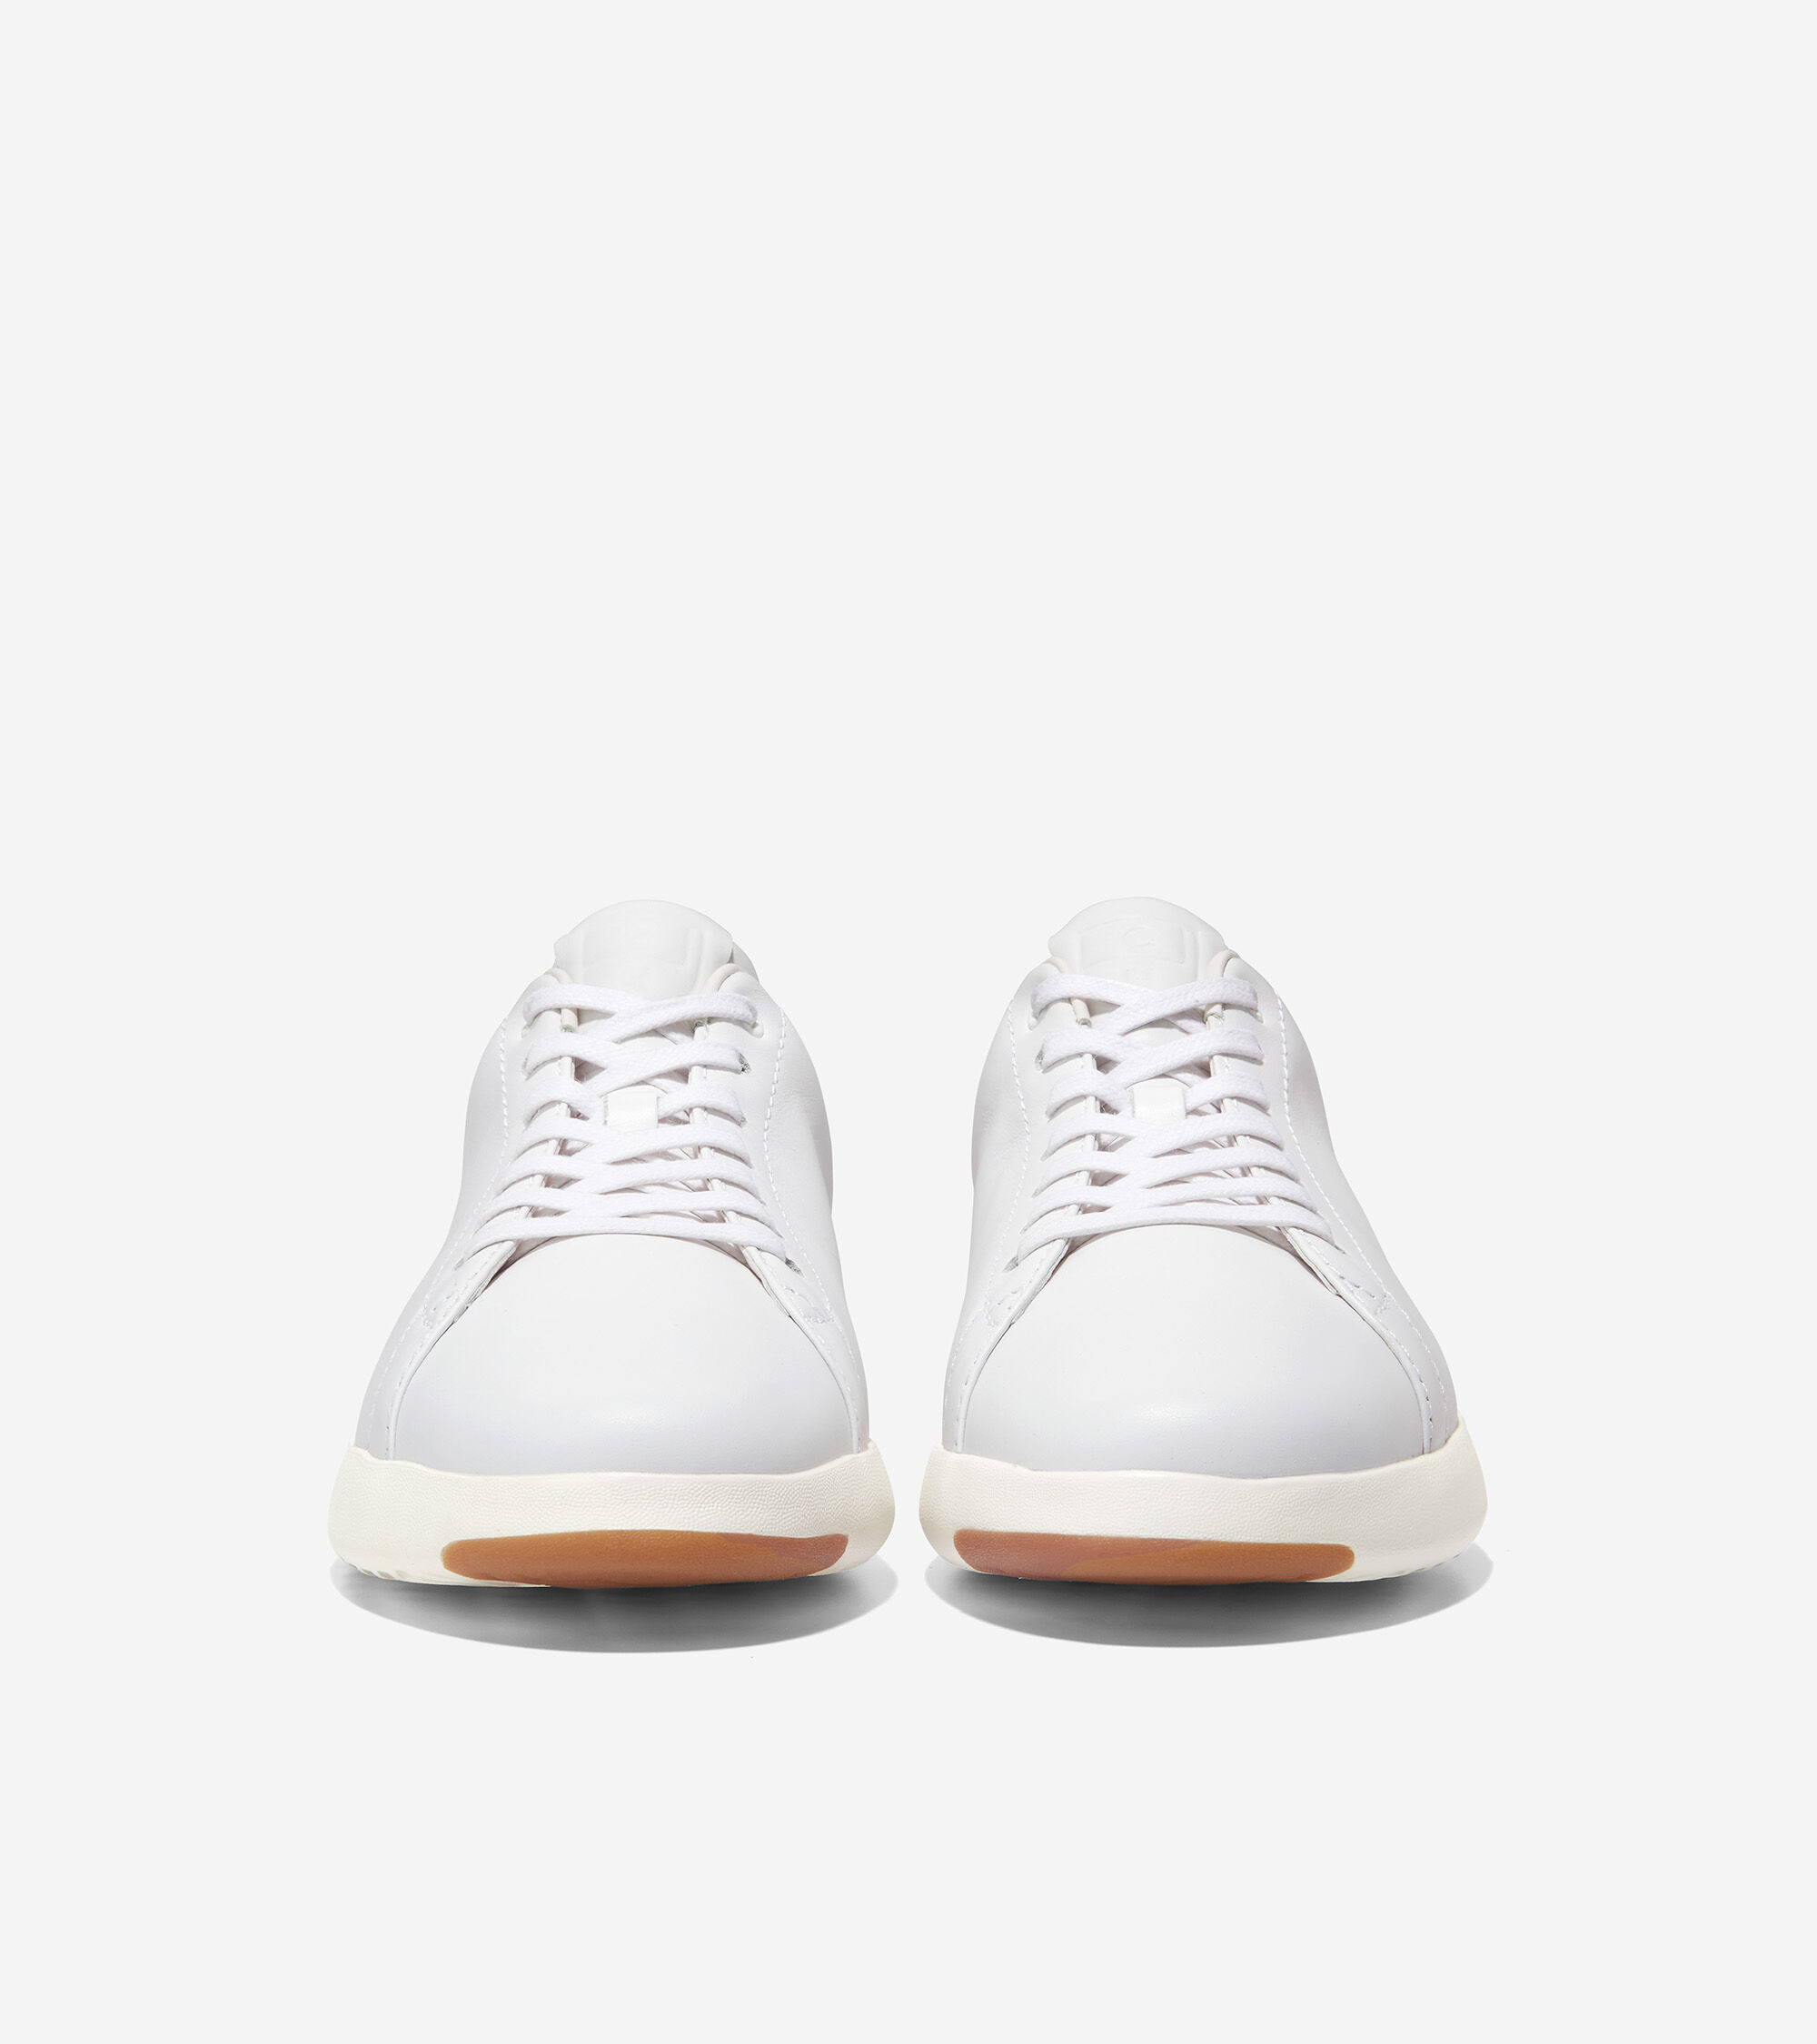 cole haan white shoes mens